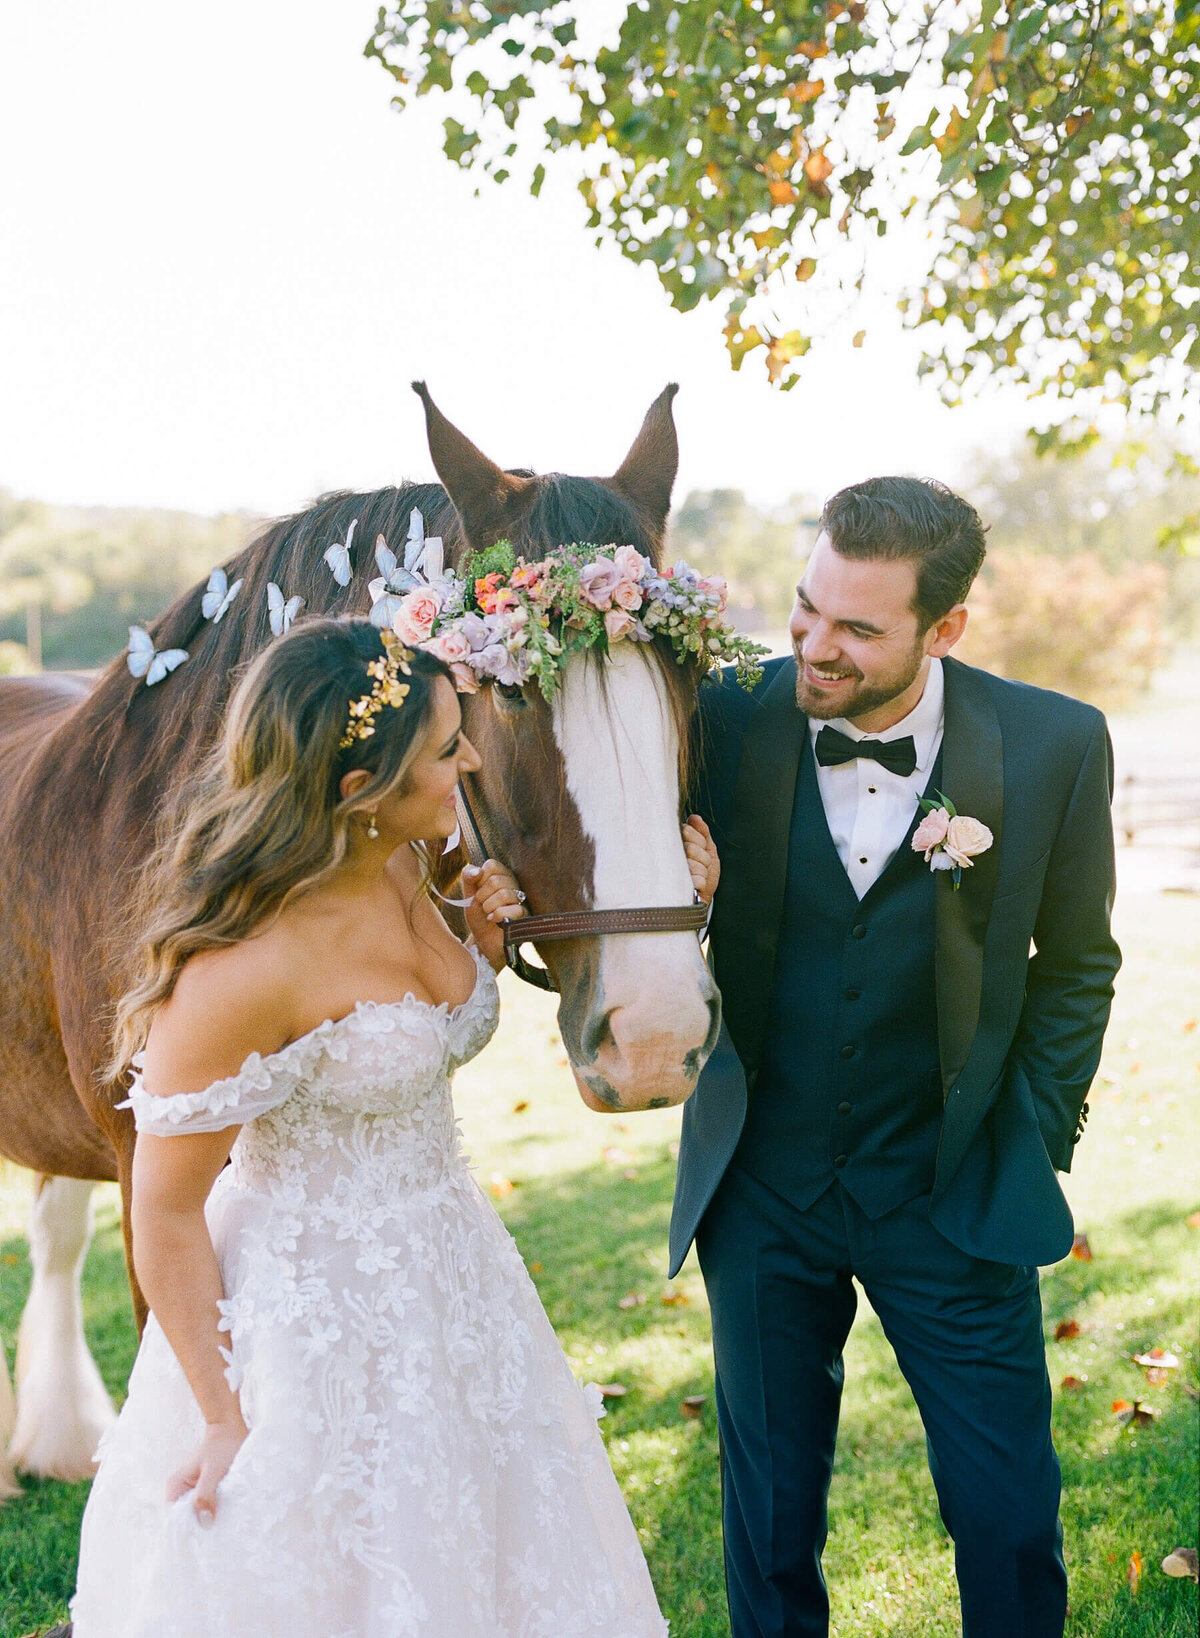 Bride and groom at barn wedding smiling with horse decorated with butterflies.